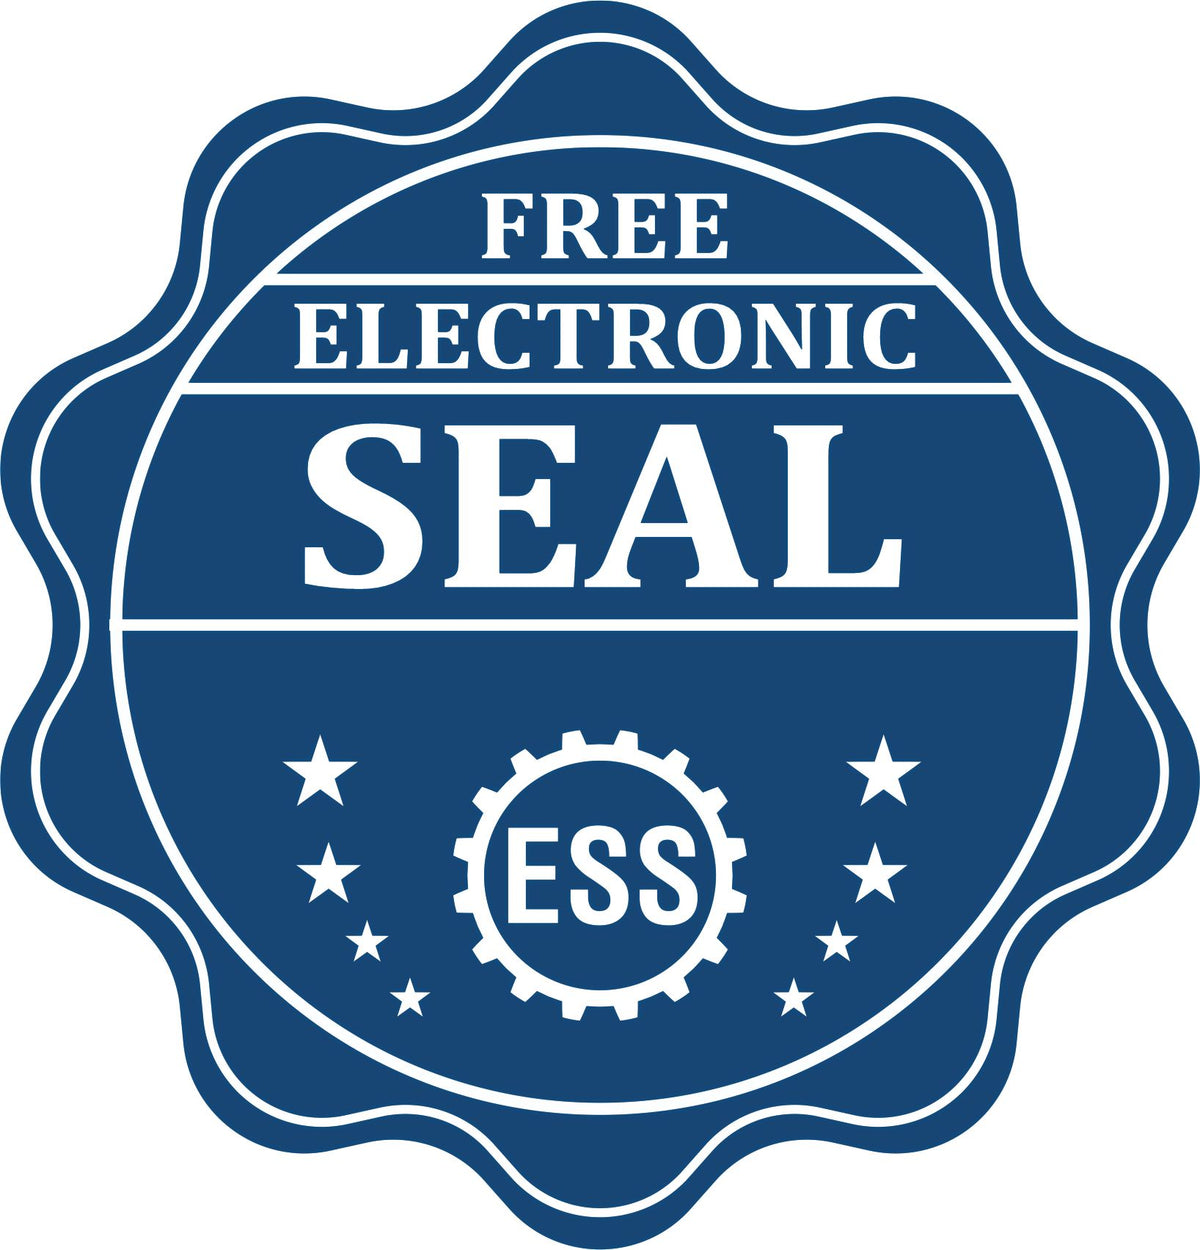 A badge showing a free electronic seal for the Slim Pre-Inked Arkansas Land Surveyor Seal Stamp with stars and the ESS gear on the emblem.